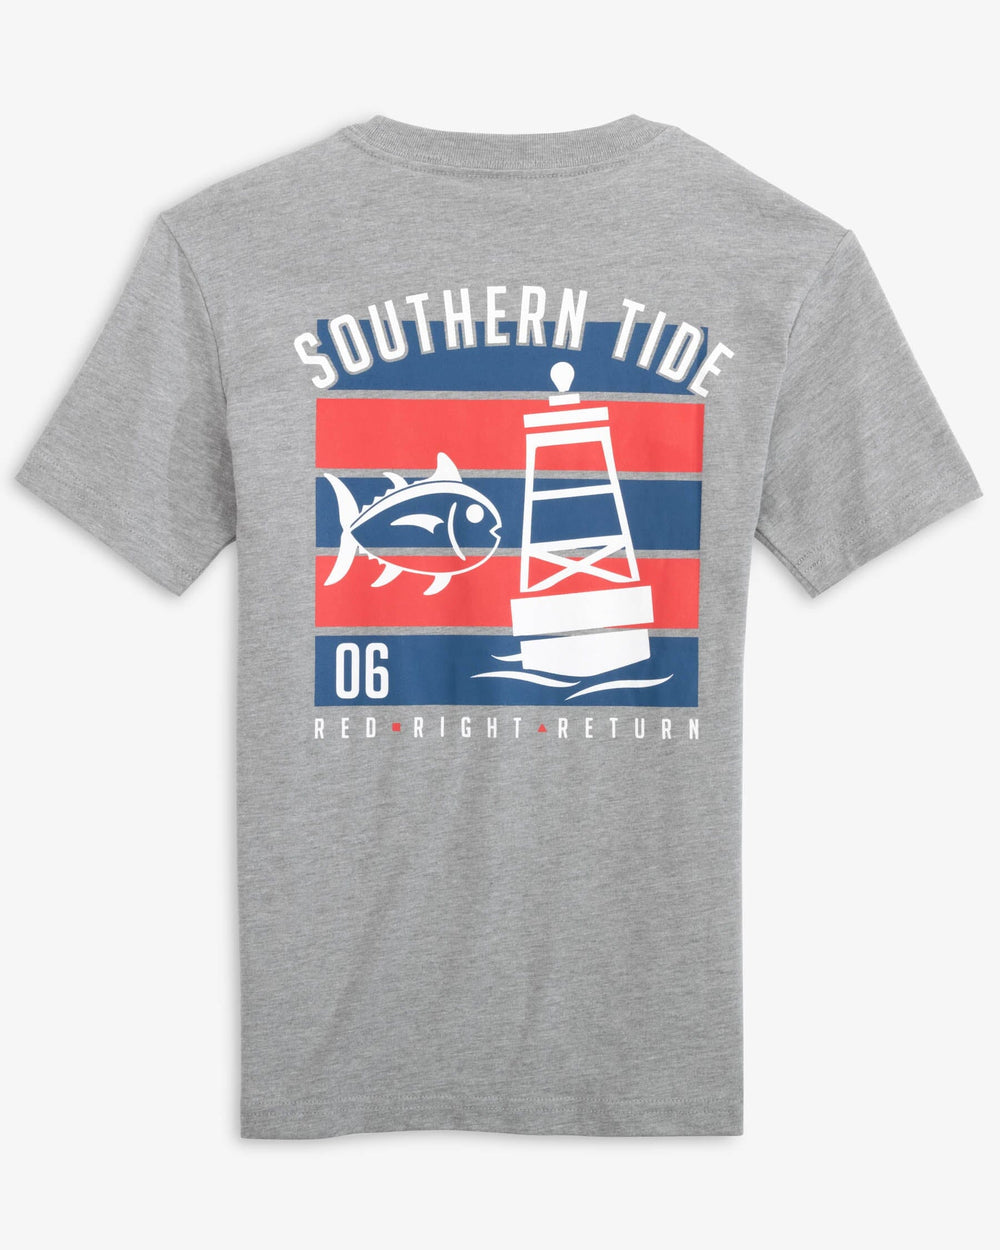 The back view of the Southern Tide Kids RRR SJ Heather T-shirt by Southern Tide - Heather Quarry